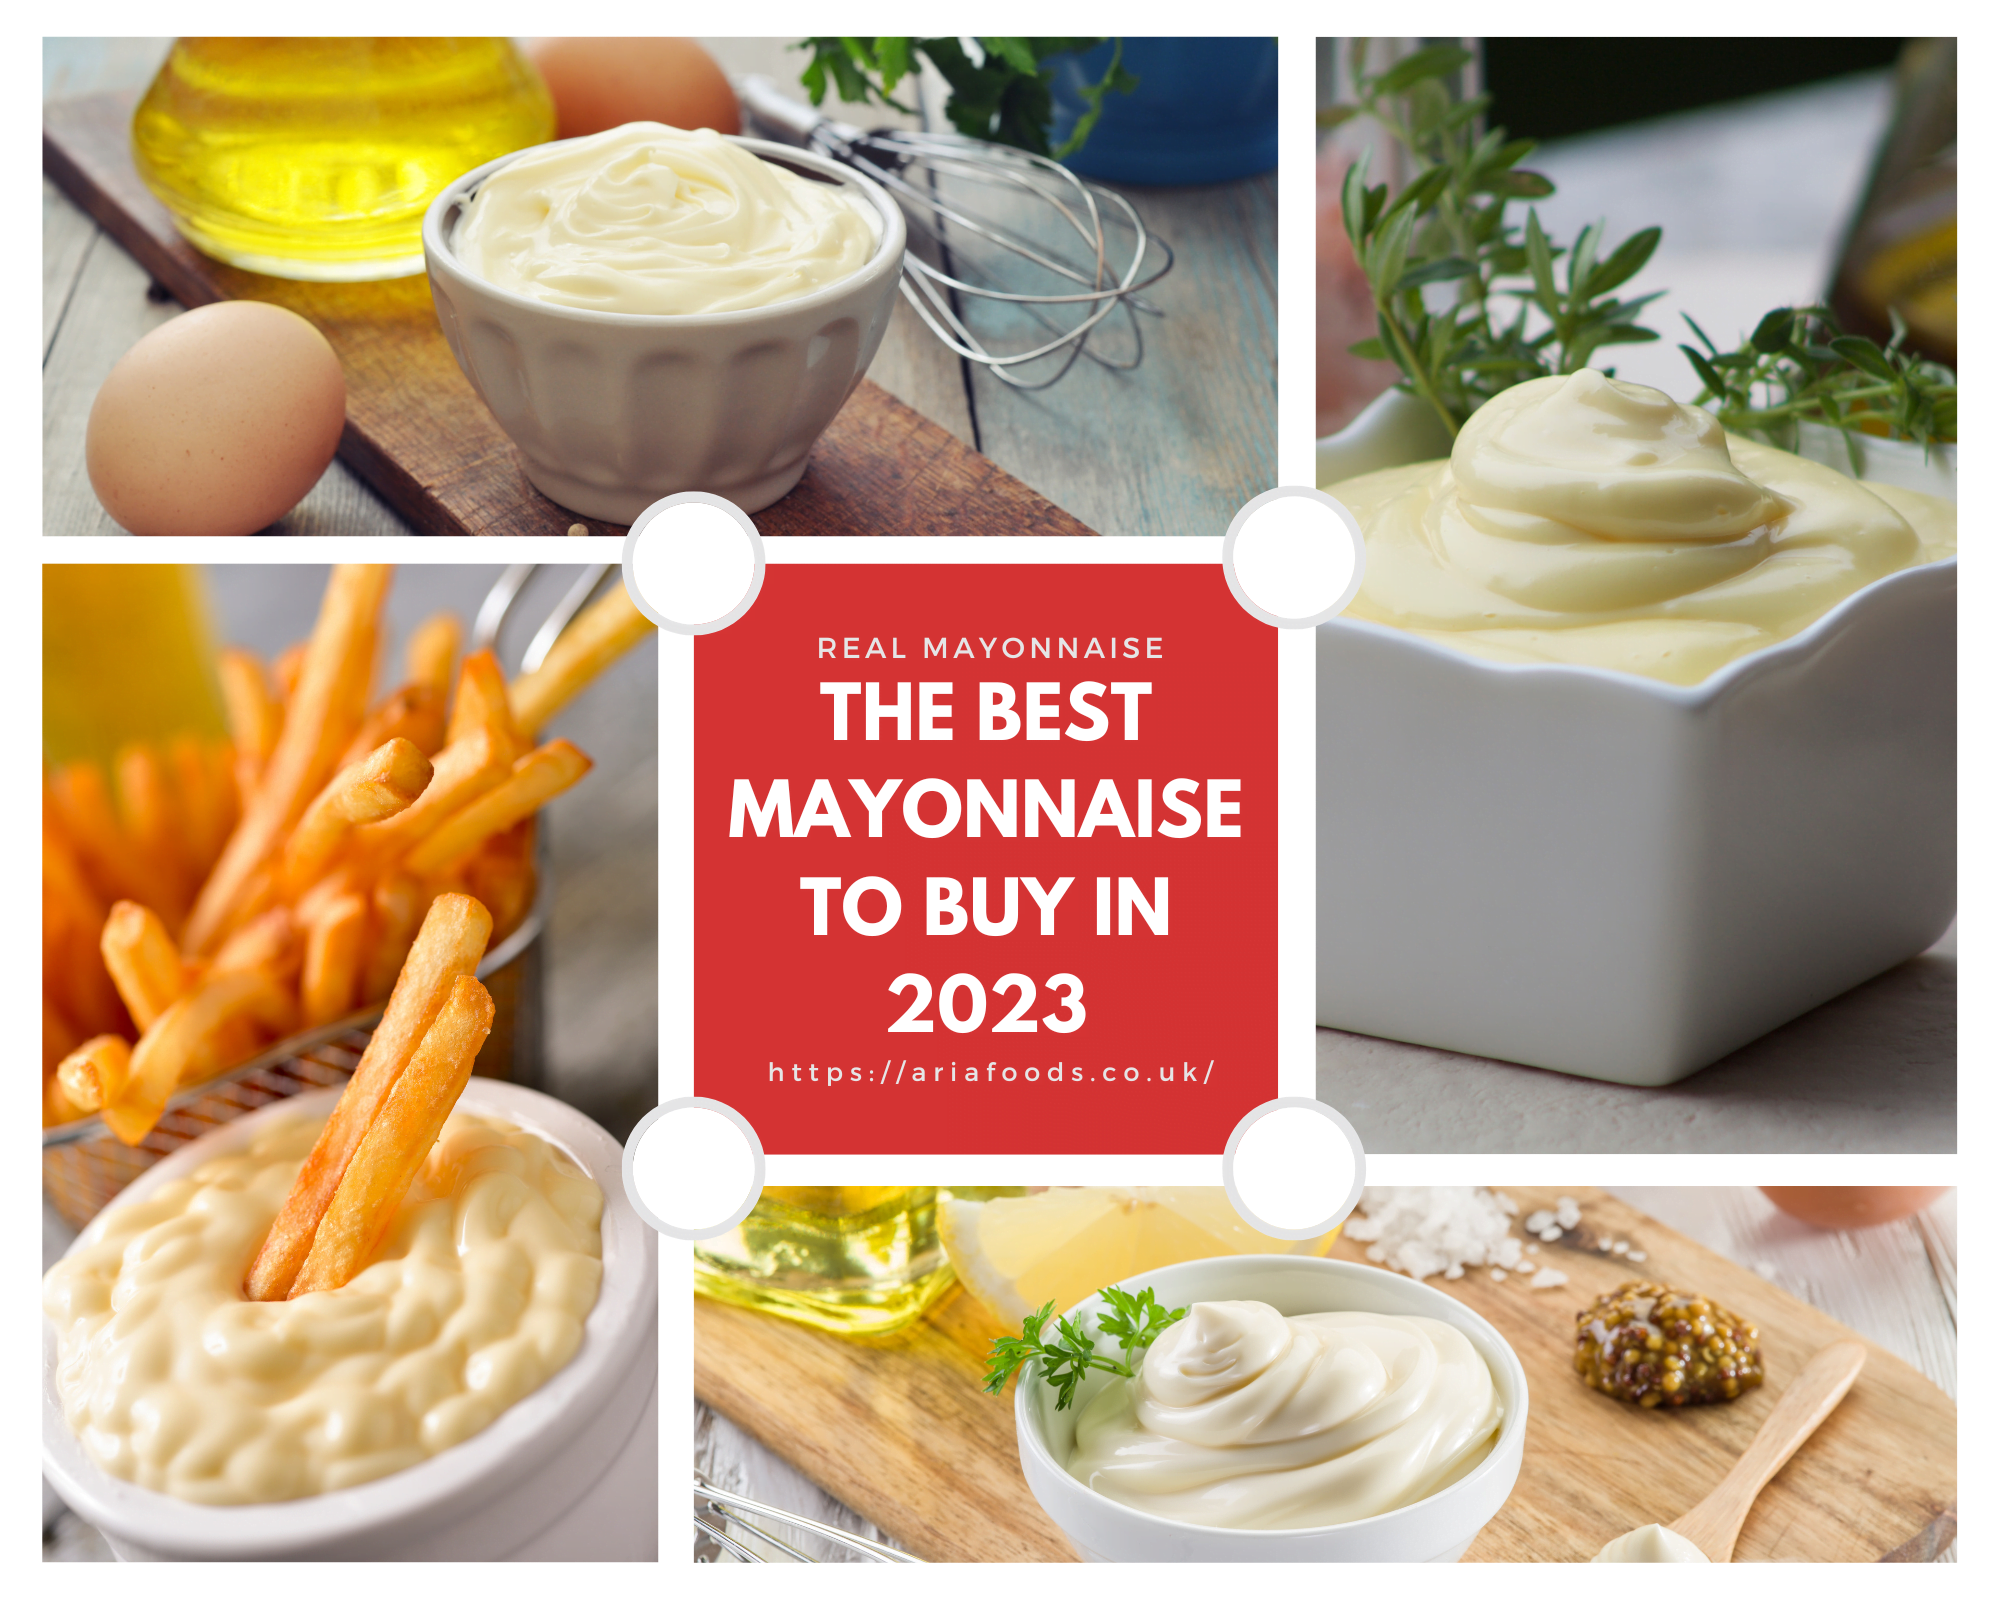 REAL MAYONNAISE | THE BEST MAYONNAISE TO BUY IN 2023